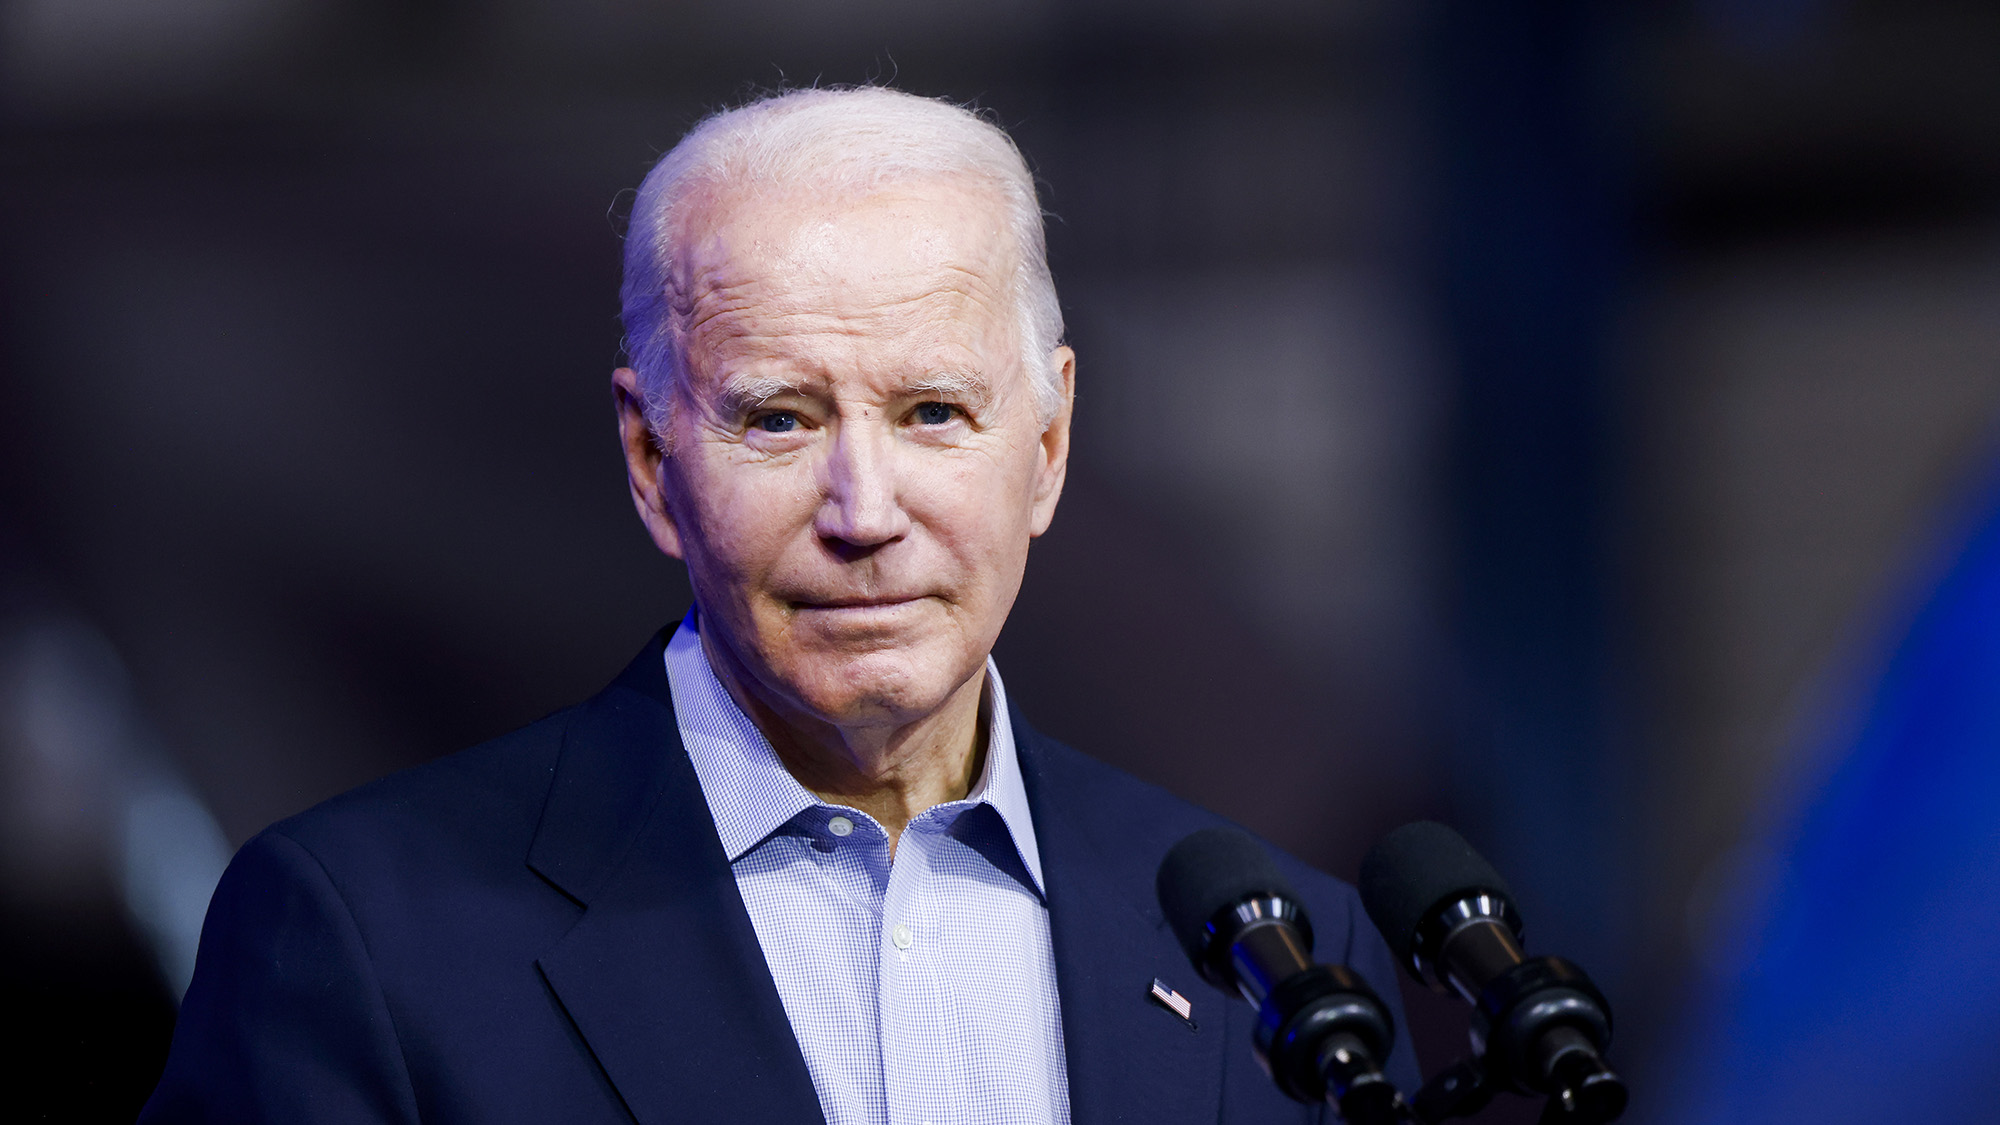 President Joe Biden Formally Informs Congress About Strikes in Iraq and Syria